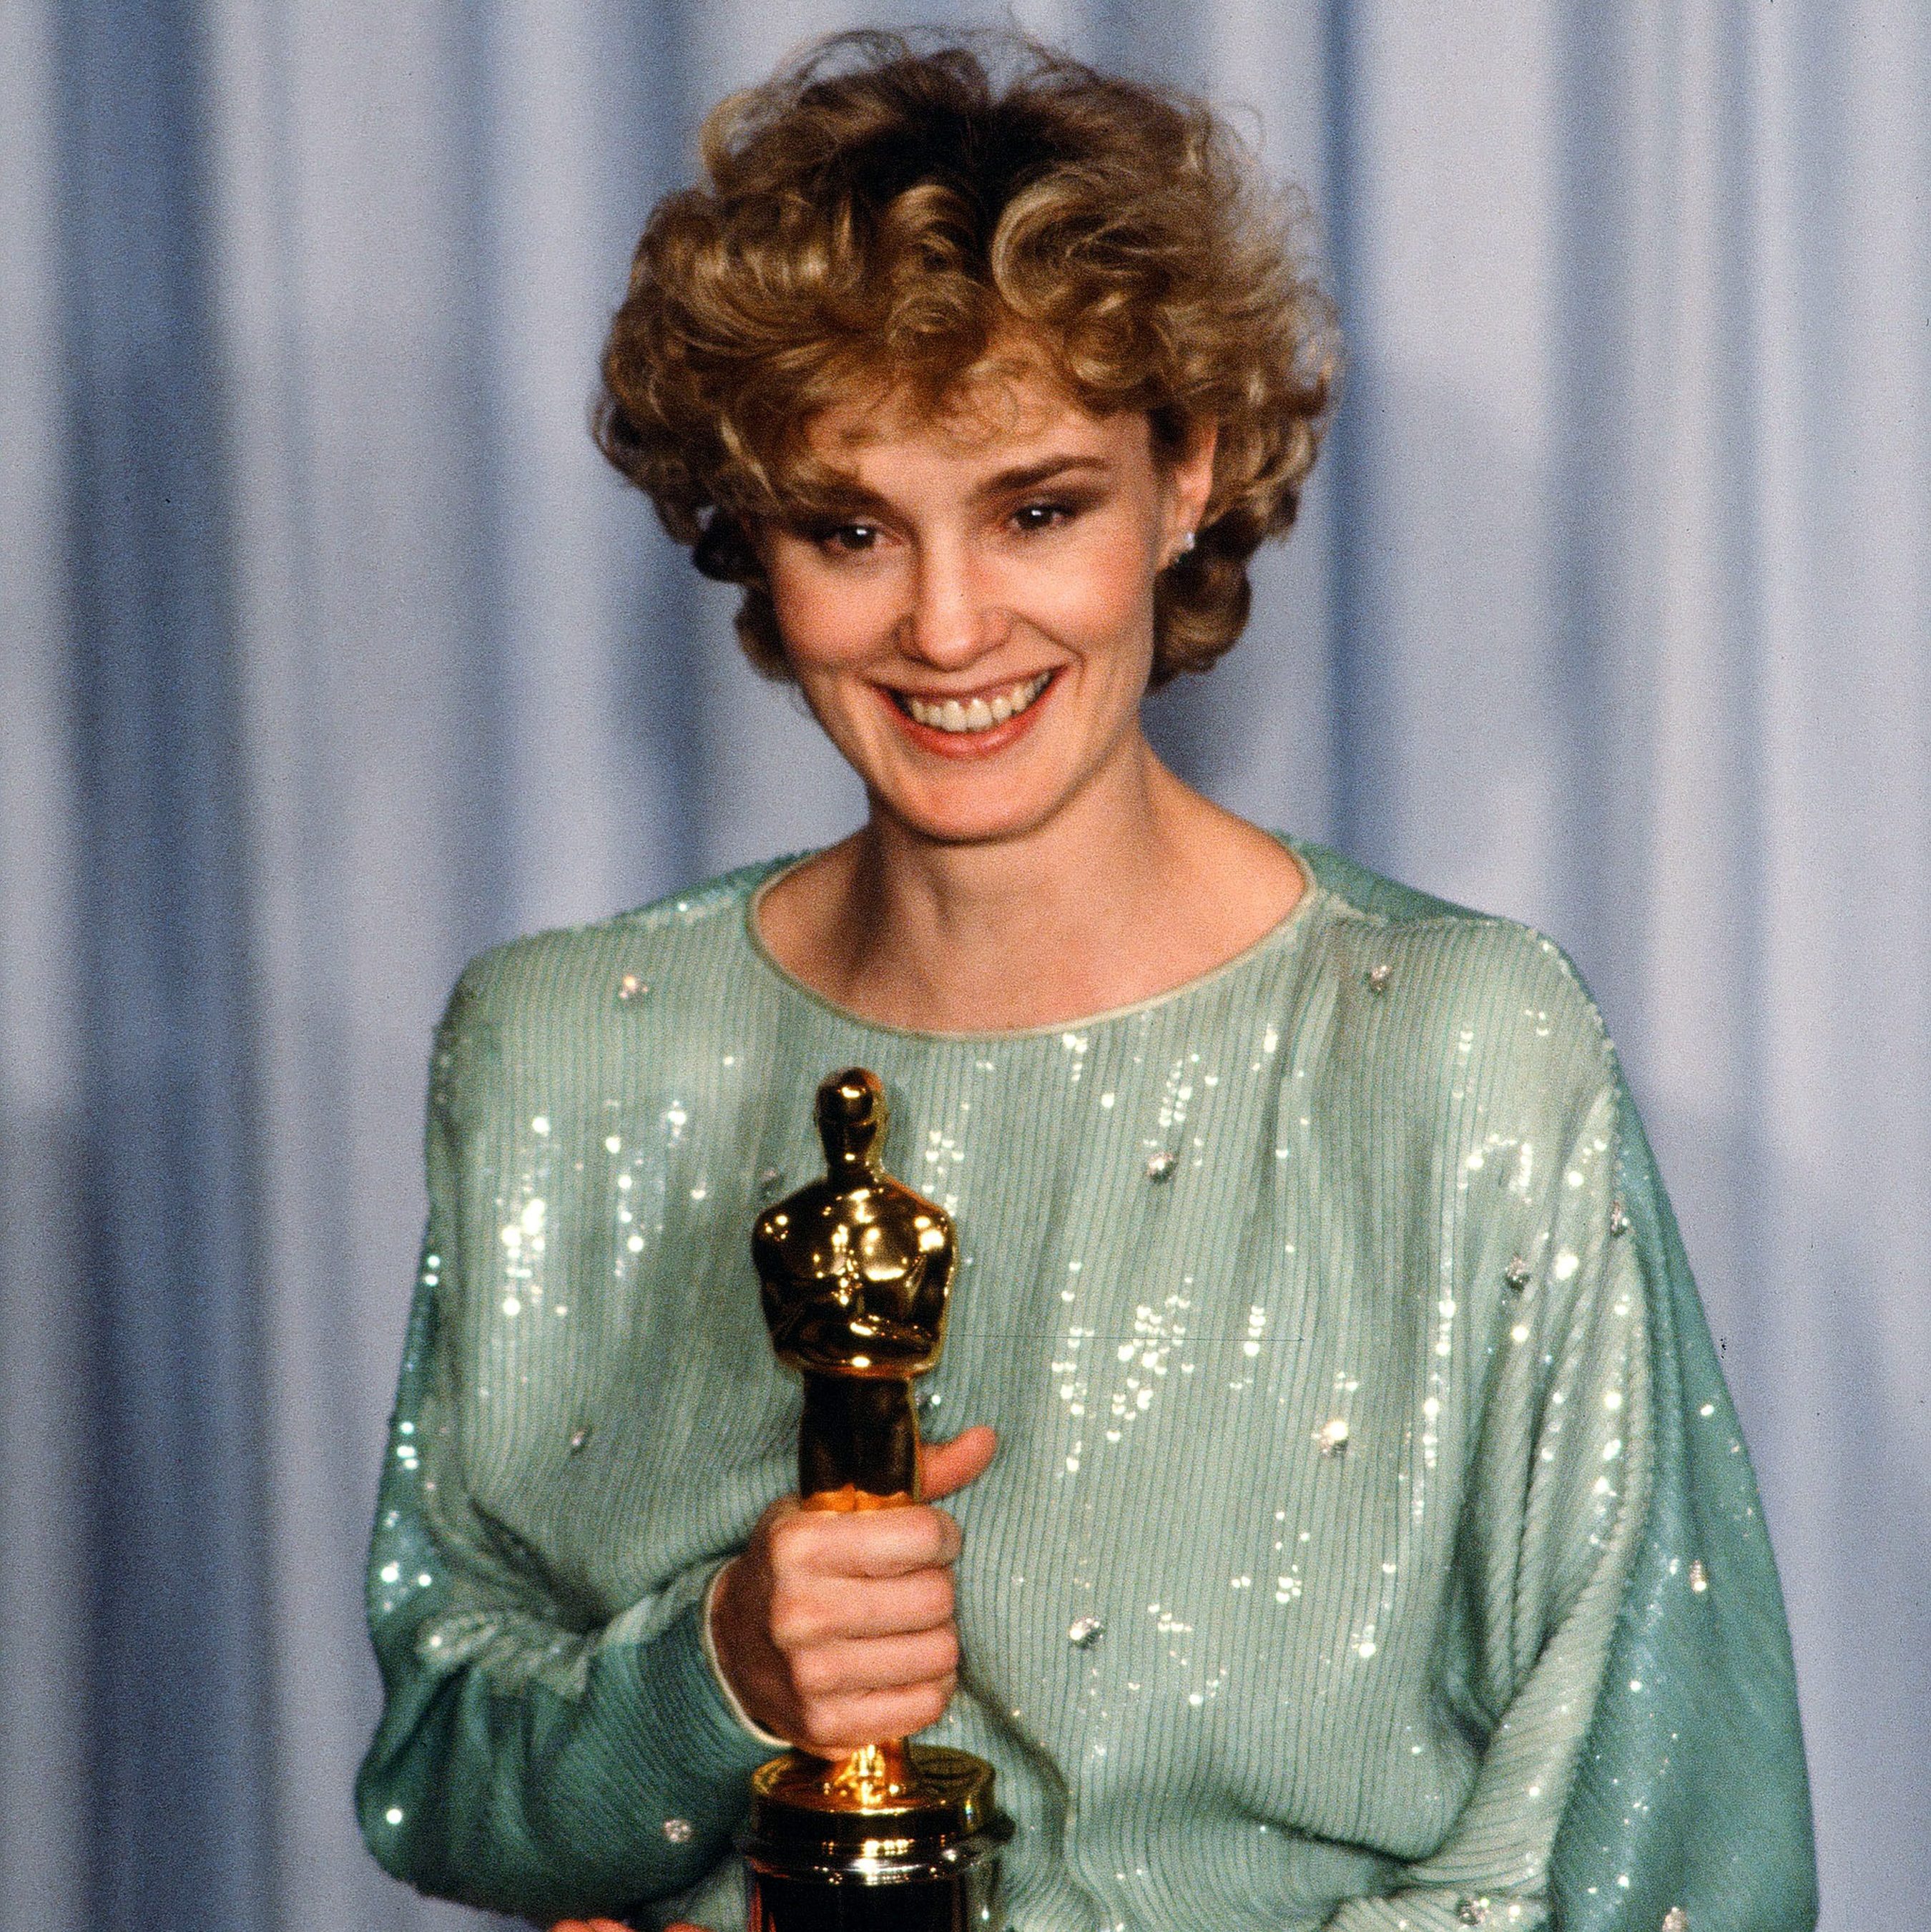 Jessica Lange poses backstage after winning Best Supporting Actress at the 55th Academy Awards, 1983